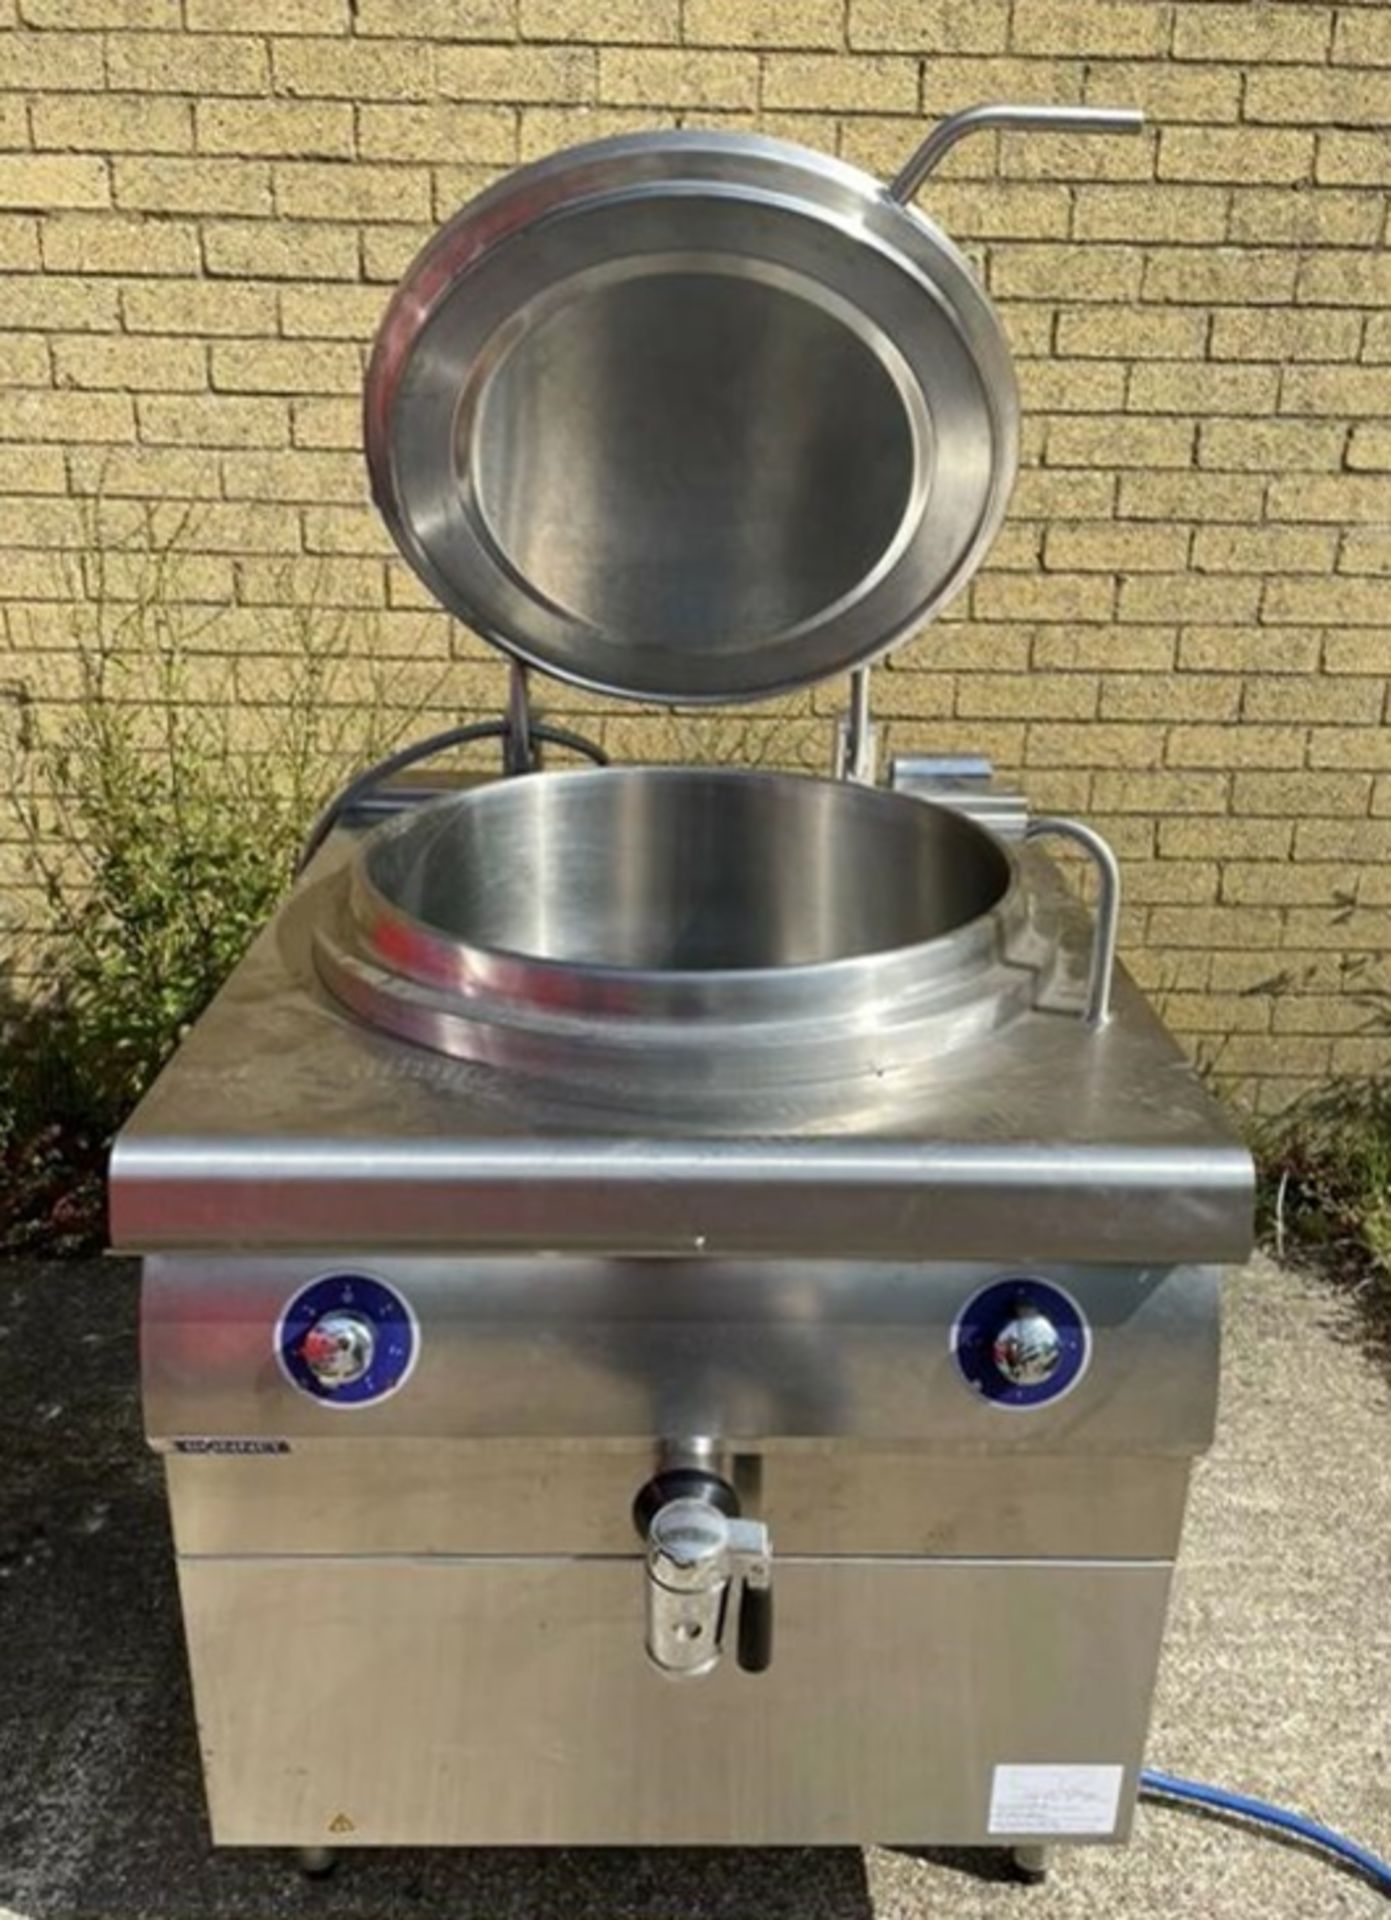 1 x Bonnet 100 Litre 3 Phase Commercial Boiling Pan - Approx RRP £4,999 - Stainless Steel